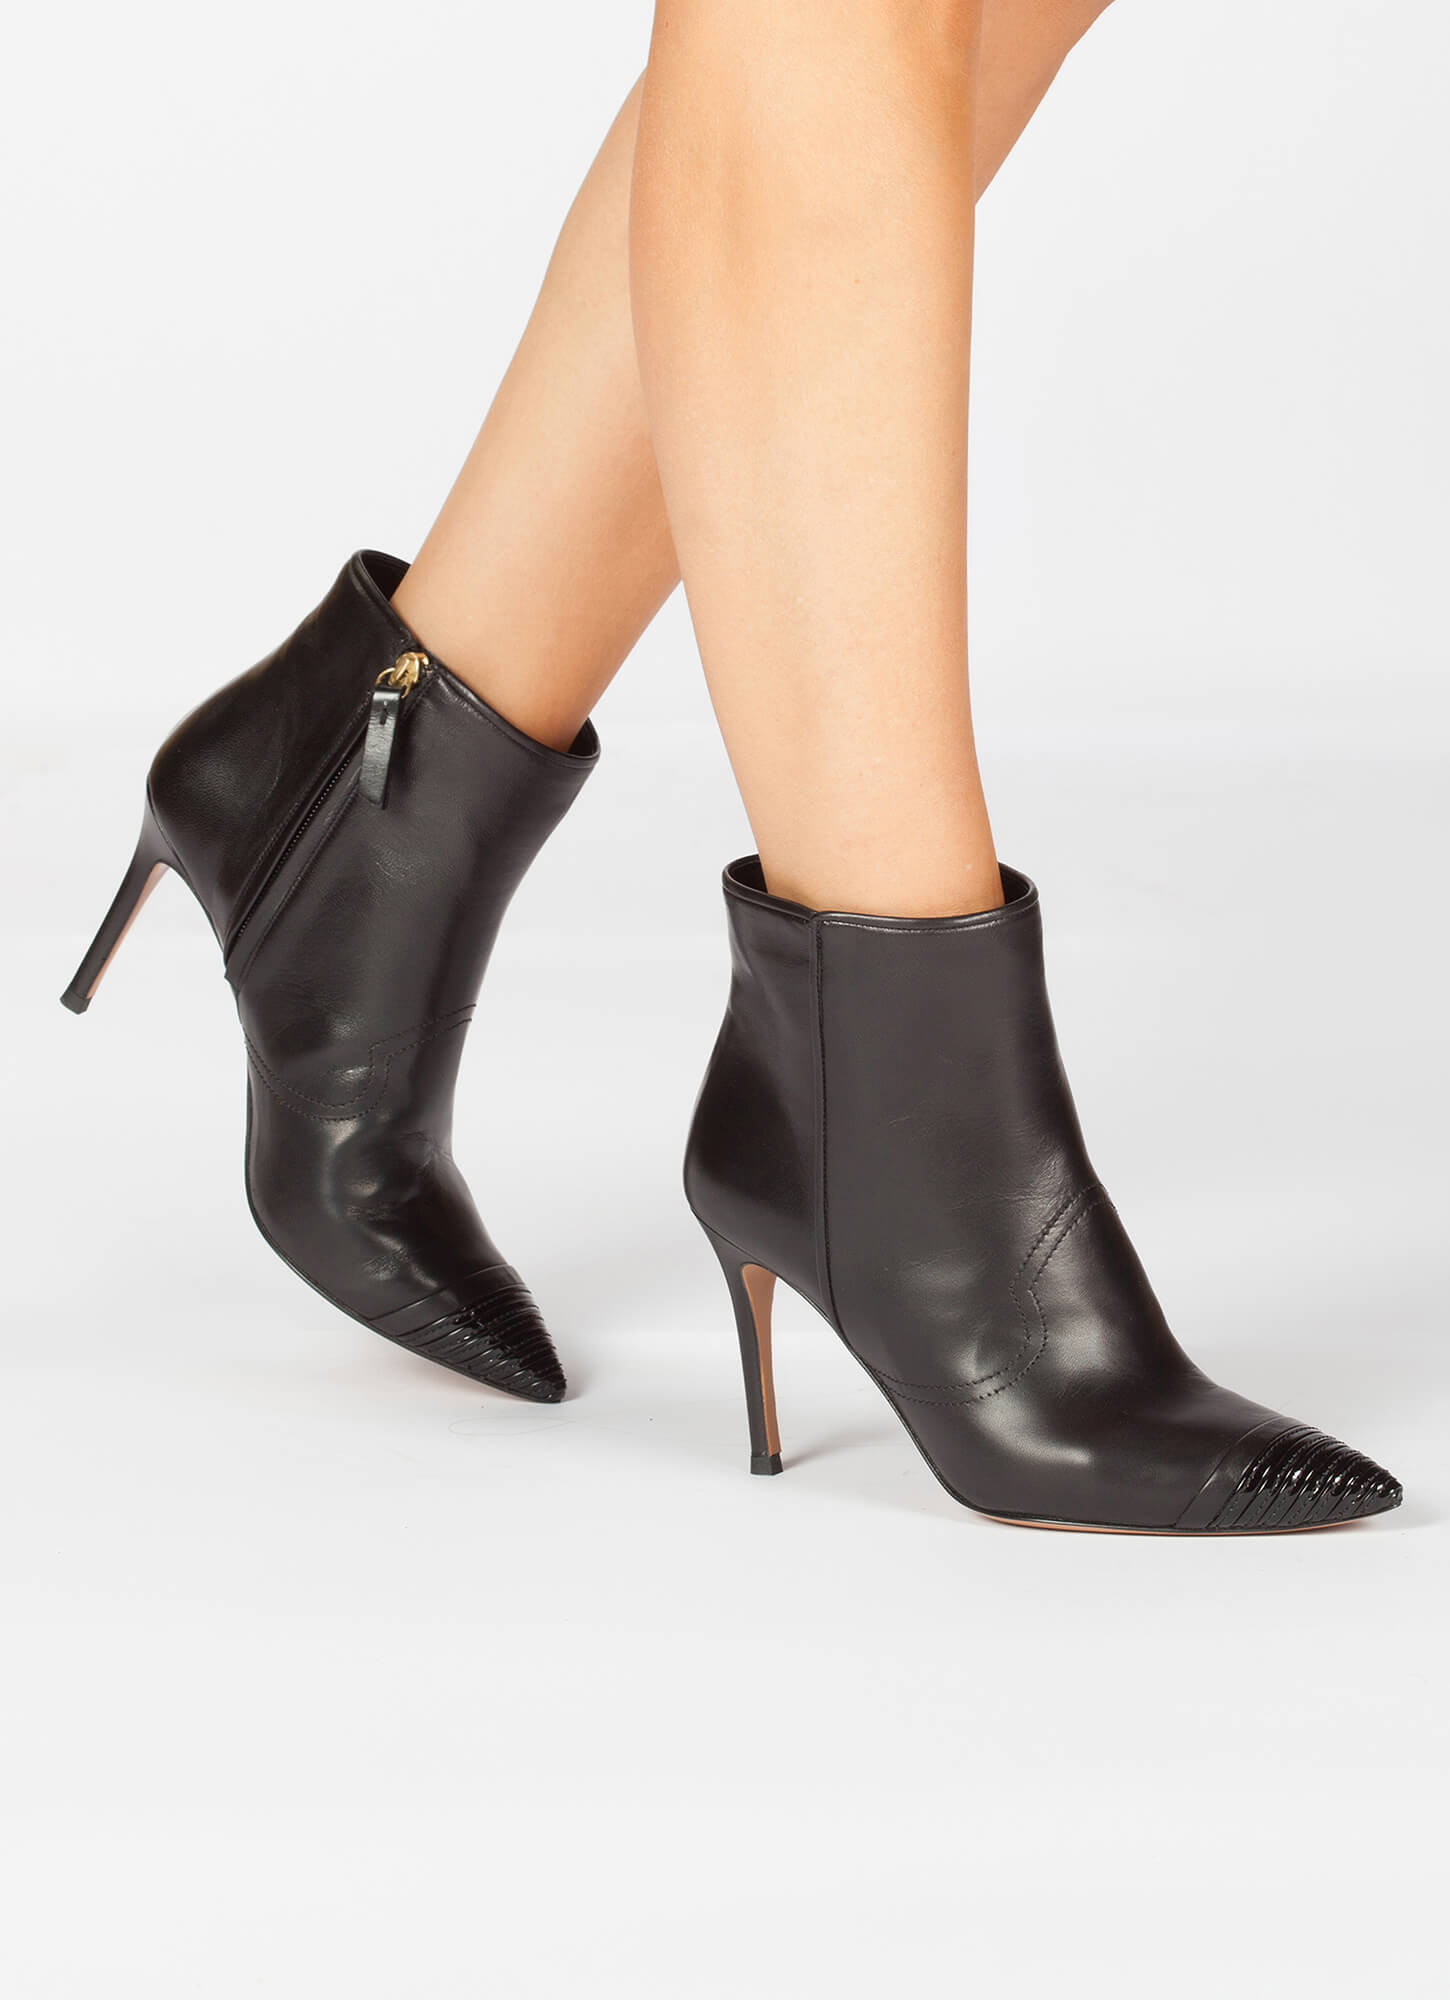 Black high heel ankle boots with a patent pointy toe . PURA LOPEZ